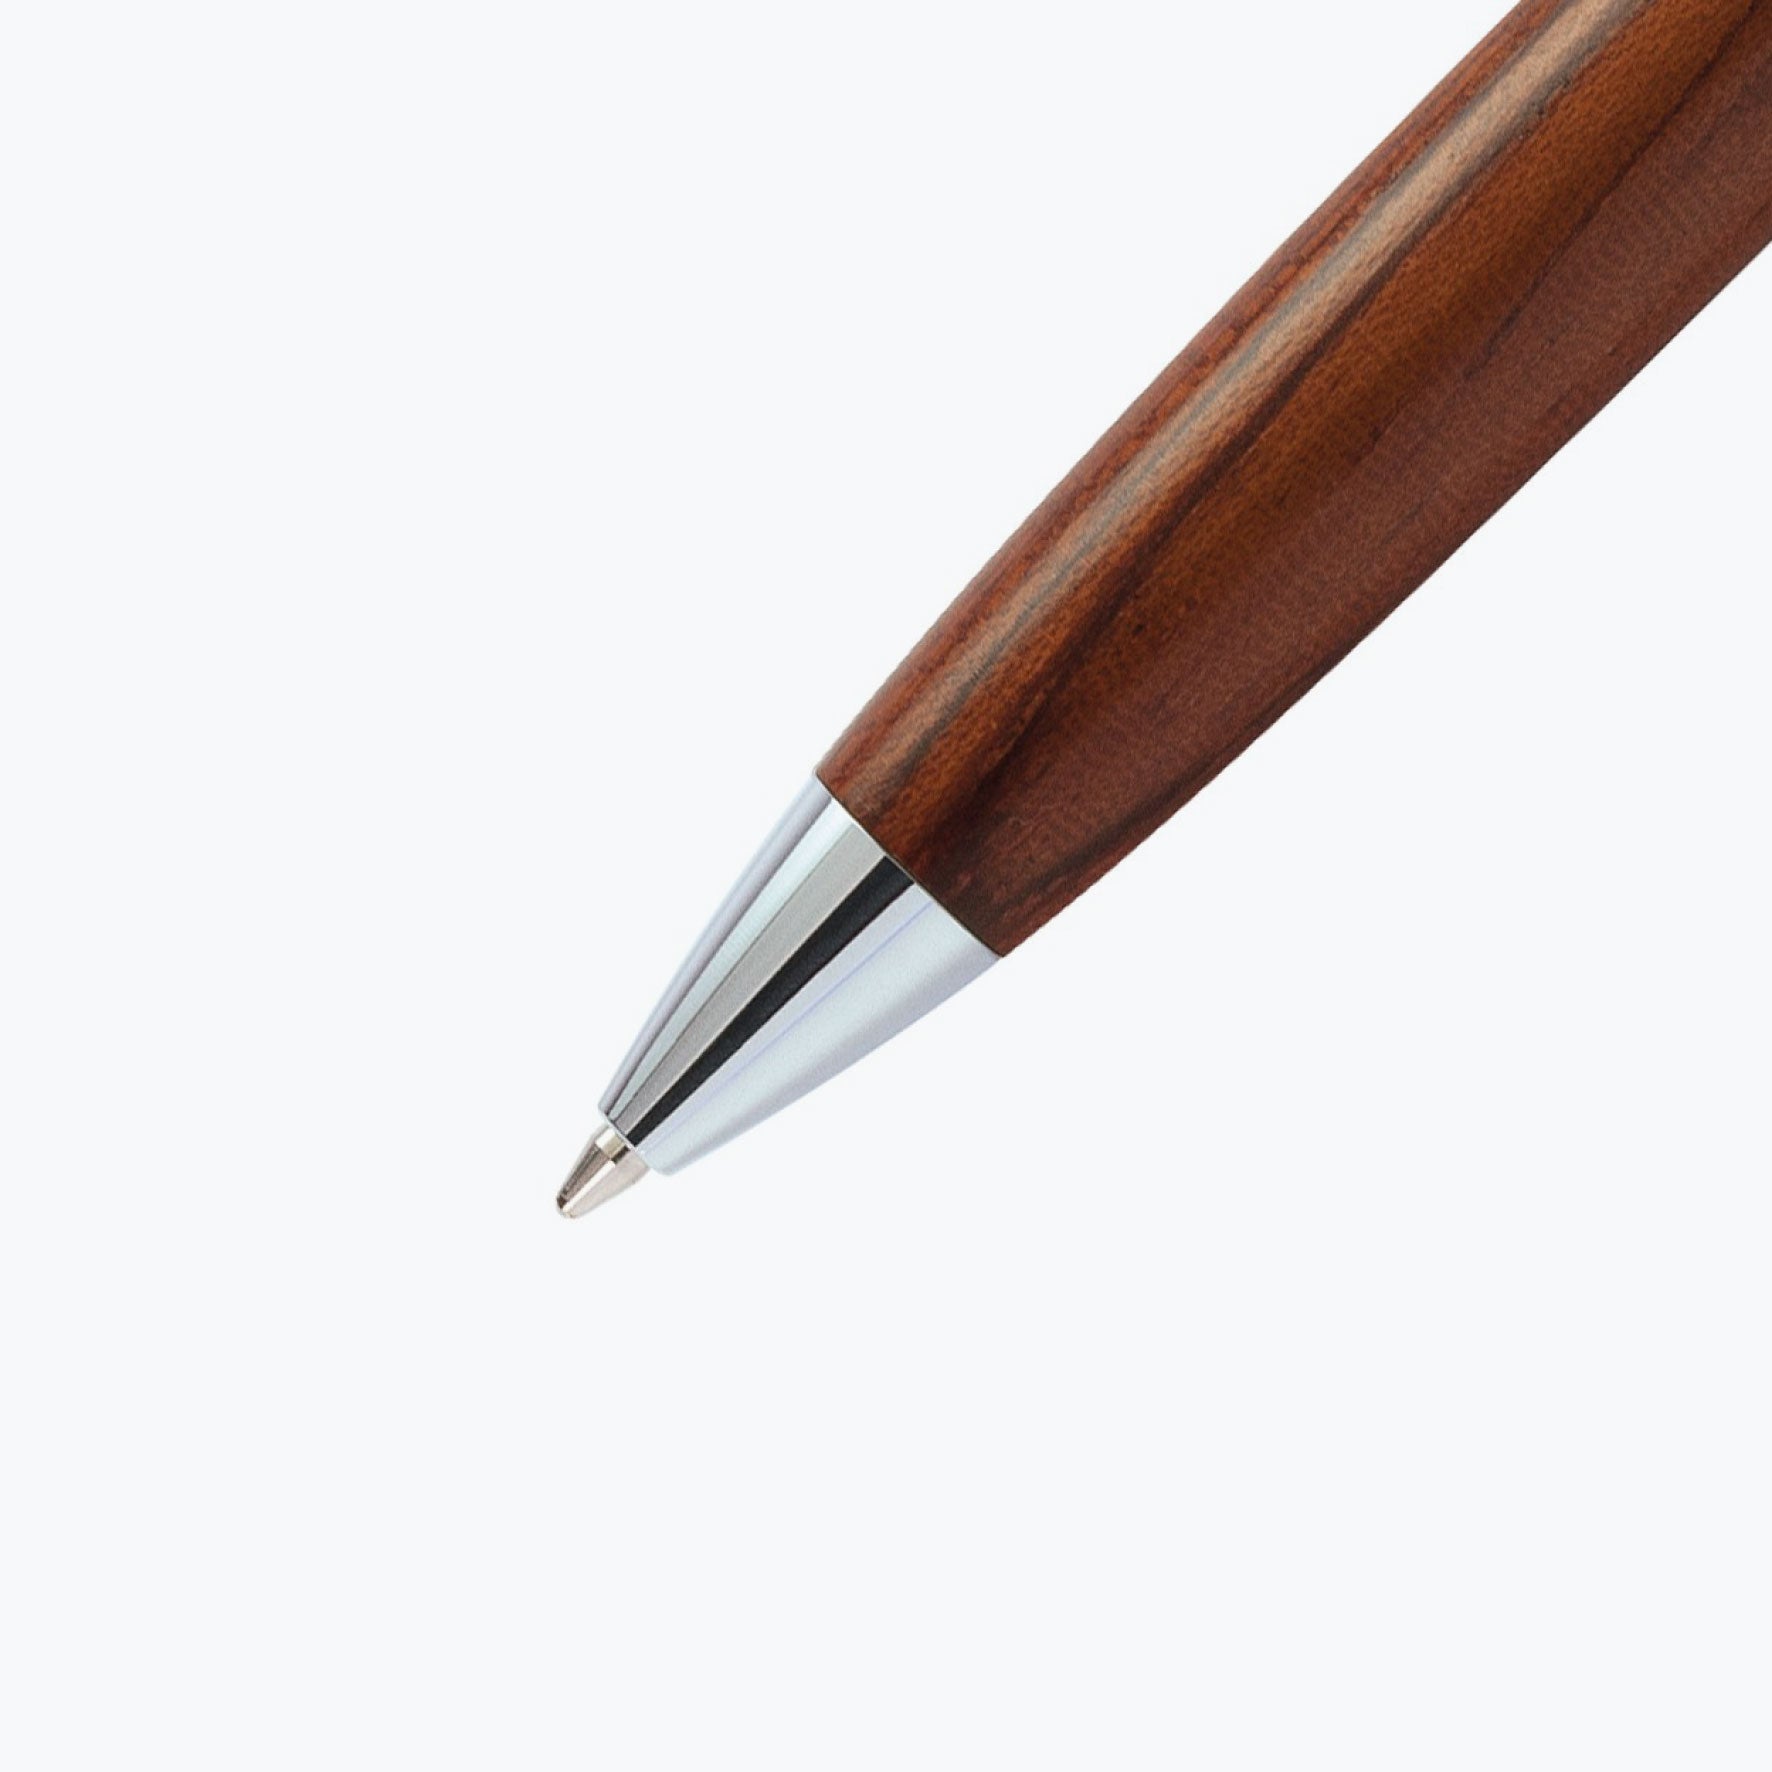 Online Germany - Ballpoint Pen - Mini Wood with Stylus - Rosewood